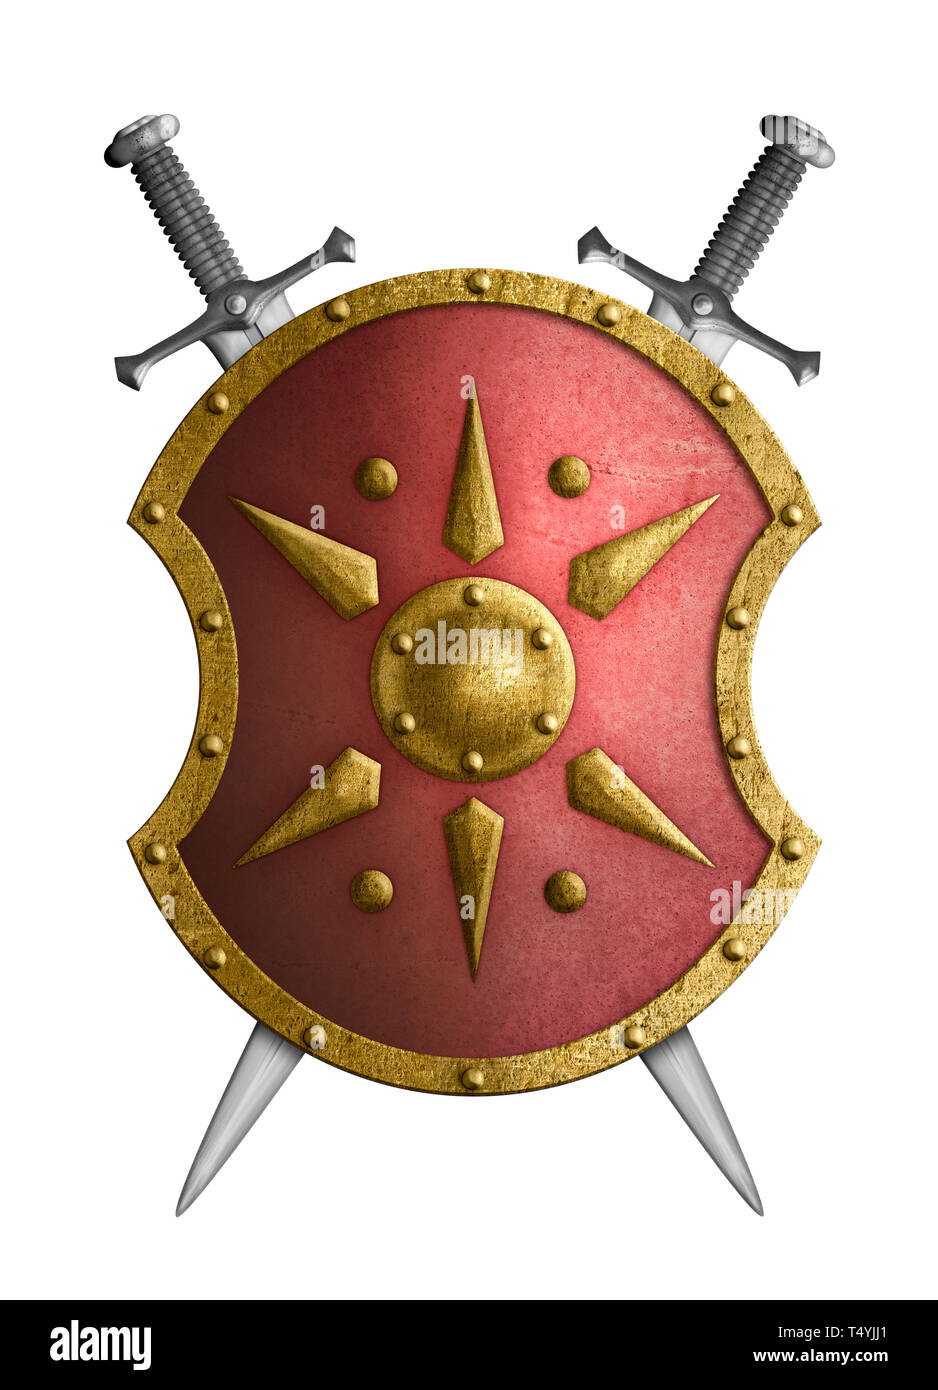 Metal red shield avec Golden Star crossed swords isolated on white Banque D'Images